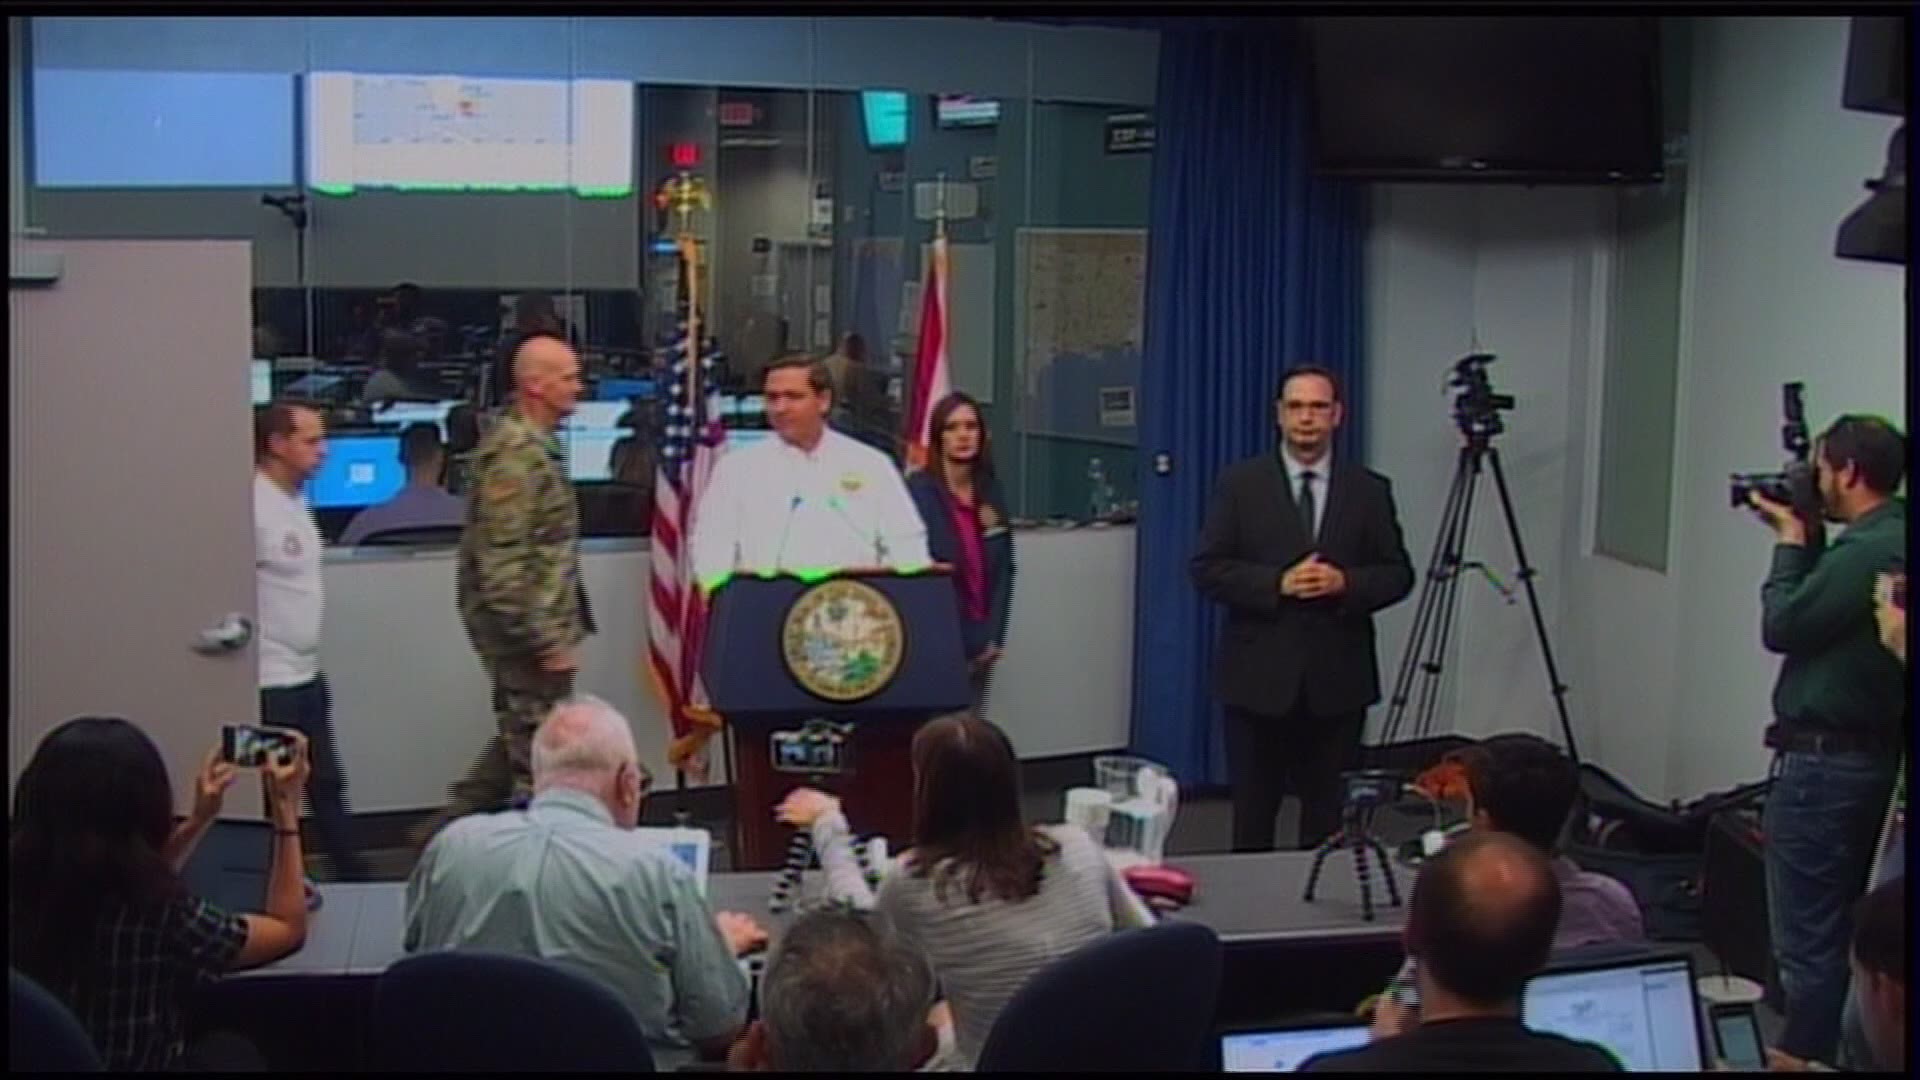 Florida's history with hurricanes was Gov. Ron DeSantis' main point during his Sunday afternoon news conference about Hurricane Dorian.